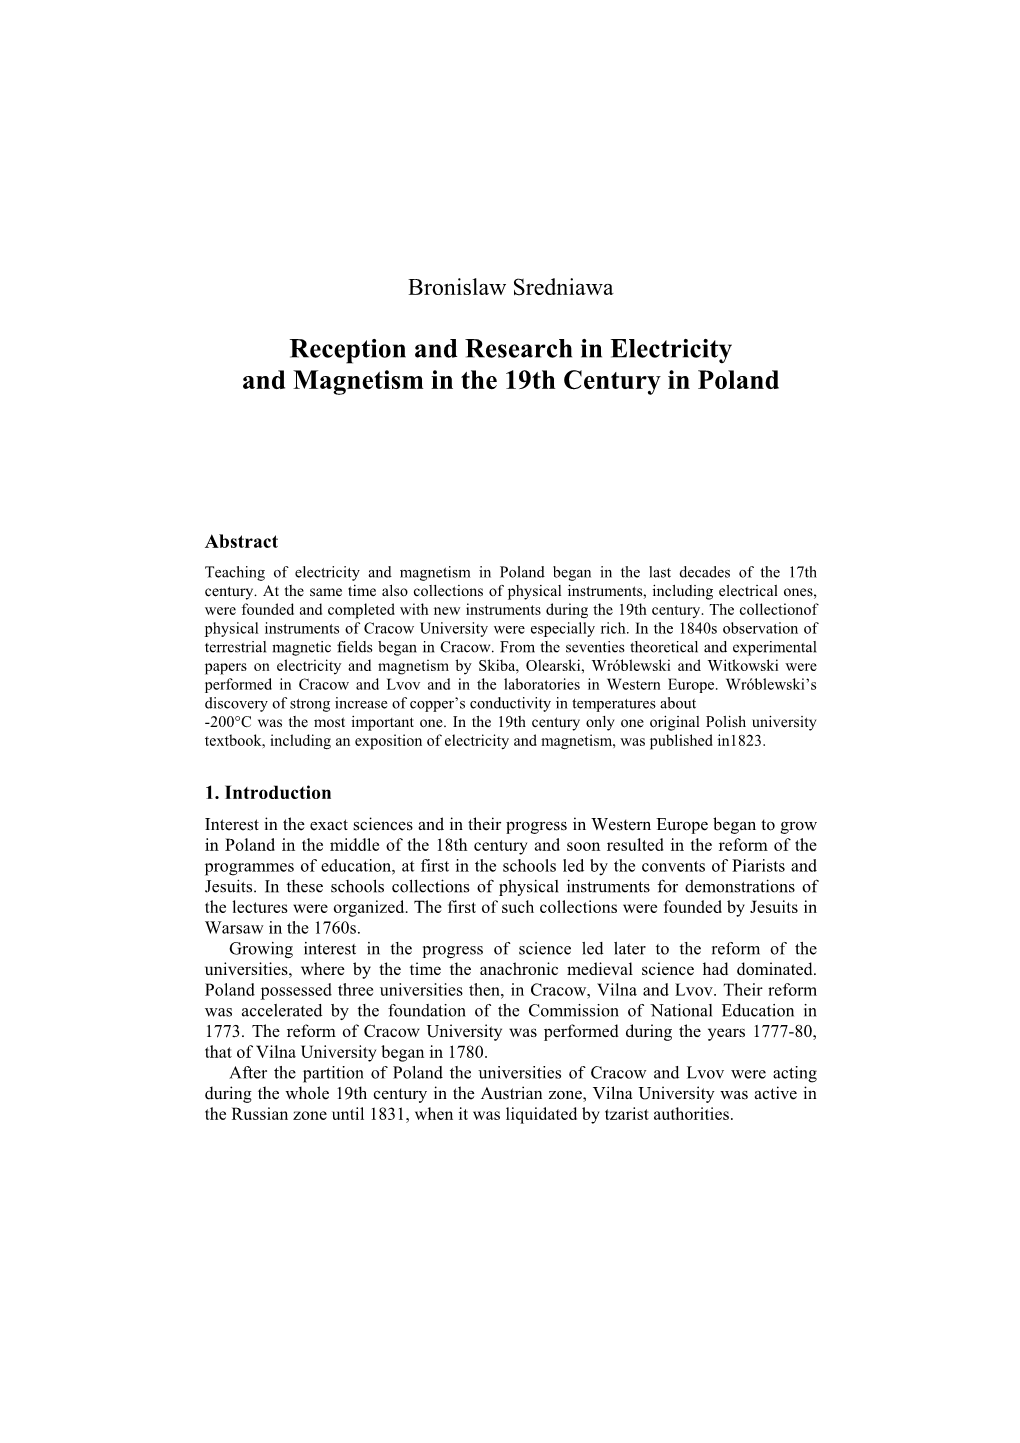 Reception and Research in Electricity and Magnetism in the 19Th Century in Poland